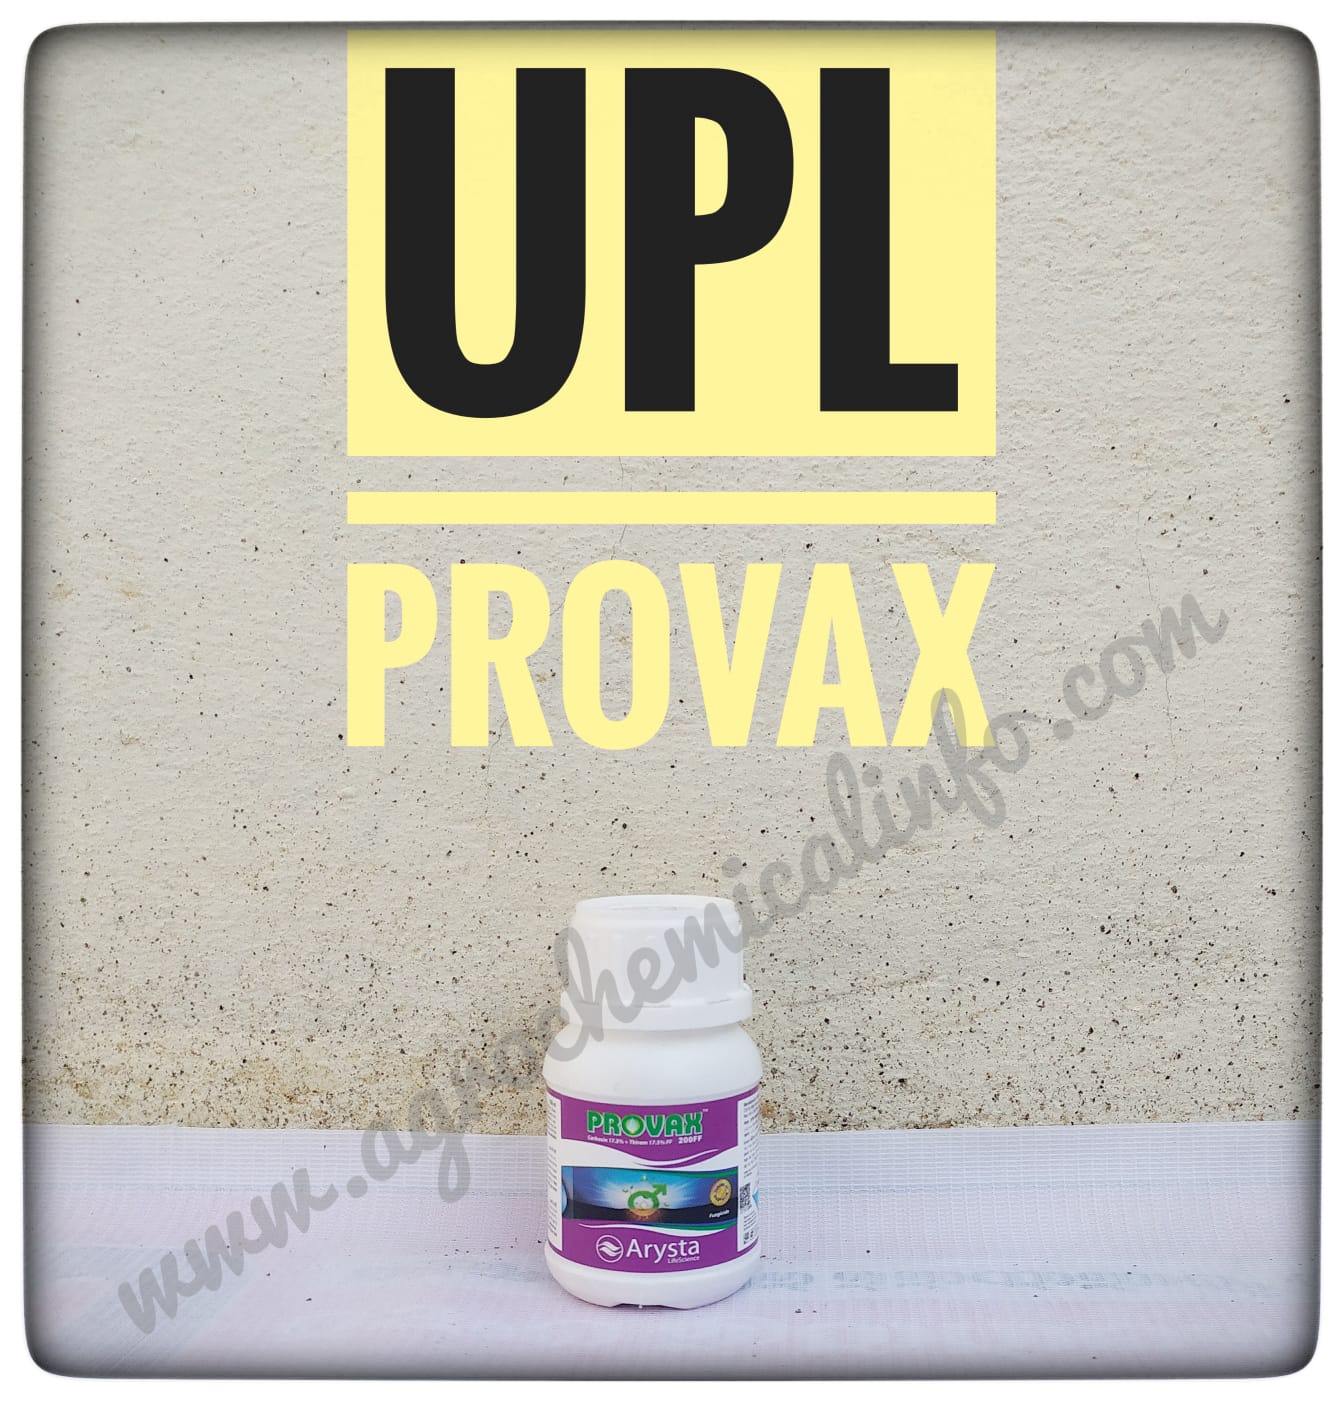 UPL Provax for Seed Treatment